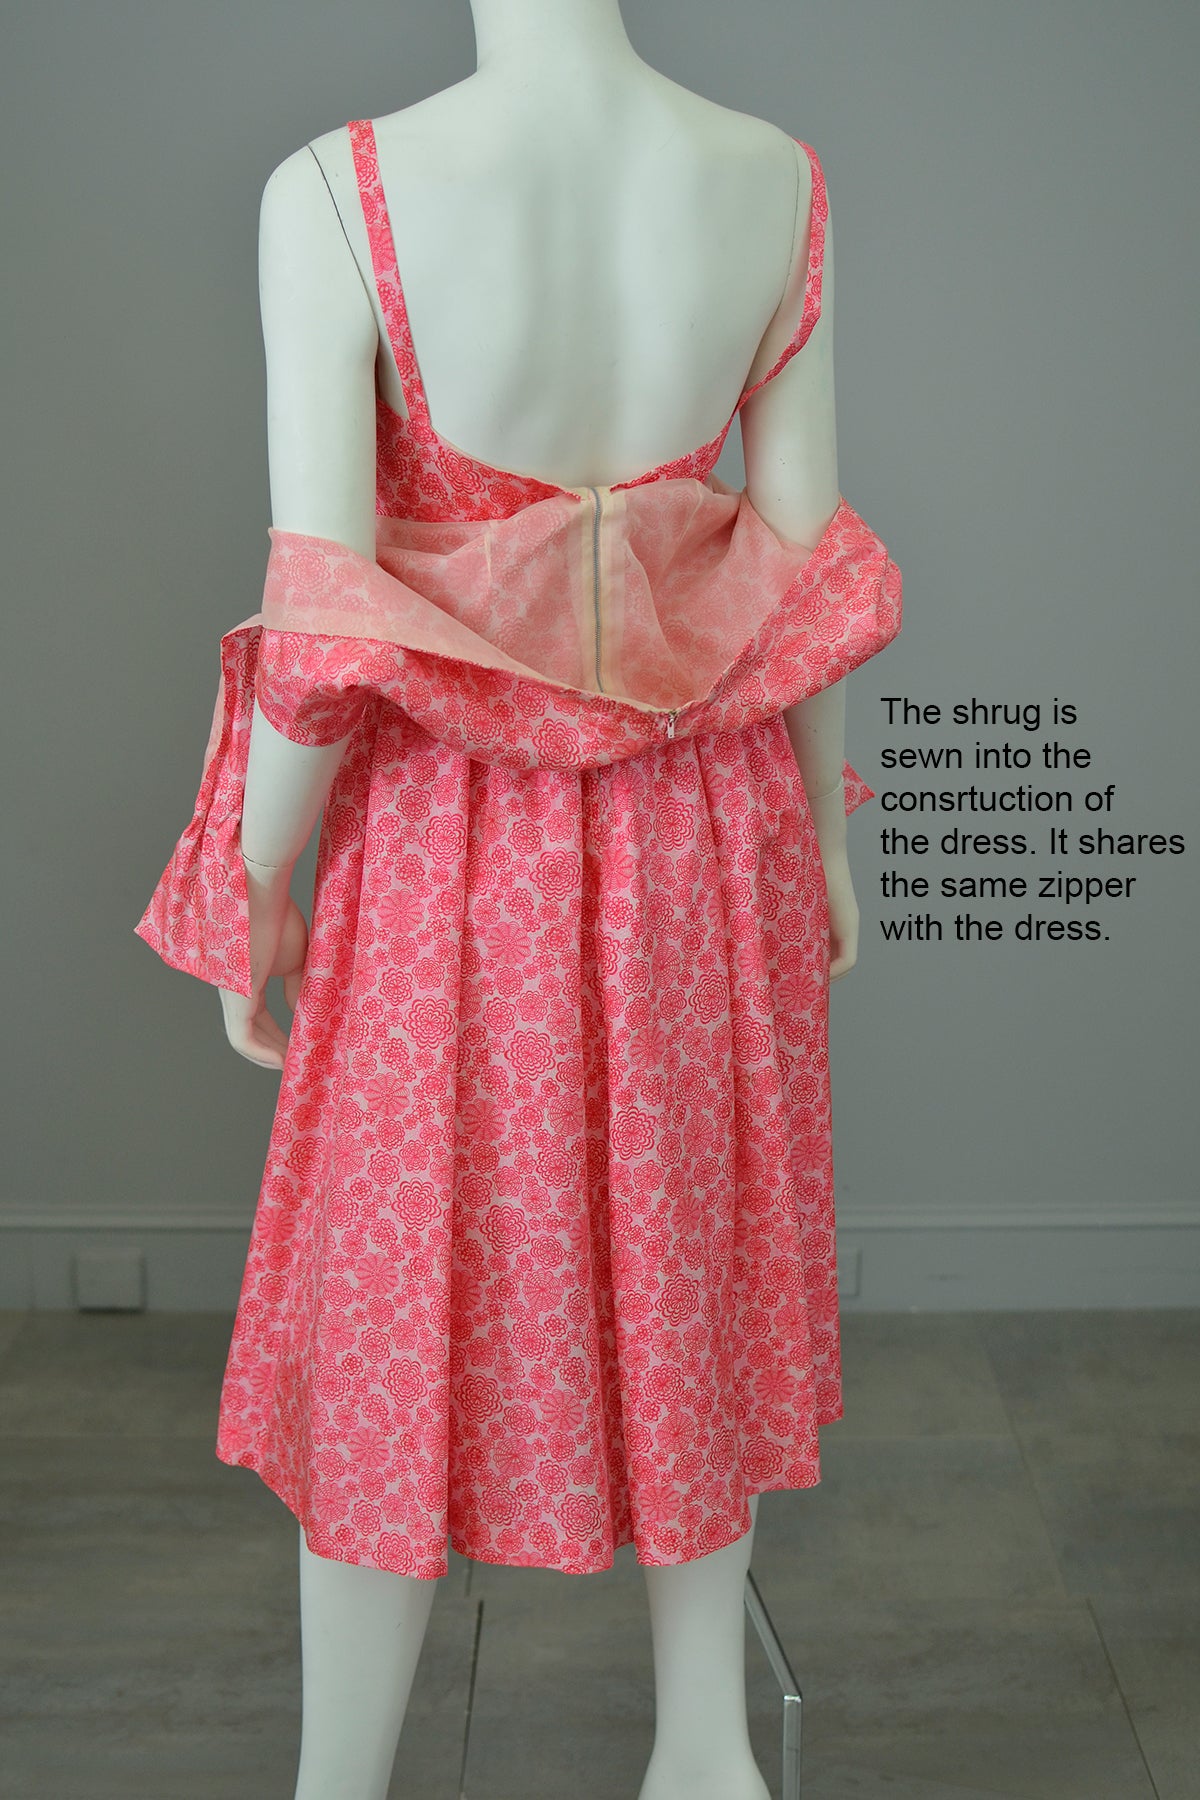 1950s Barbie Hot Pink Pinwheels Print Fit and Flare Party Dress with Attached Tie Front Shrug